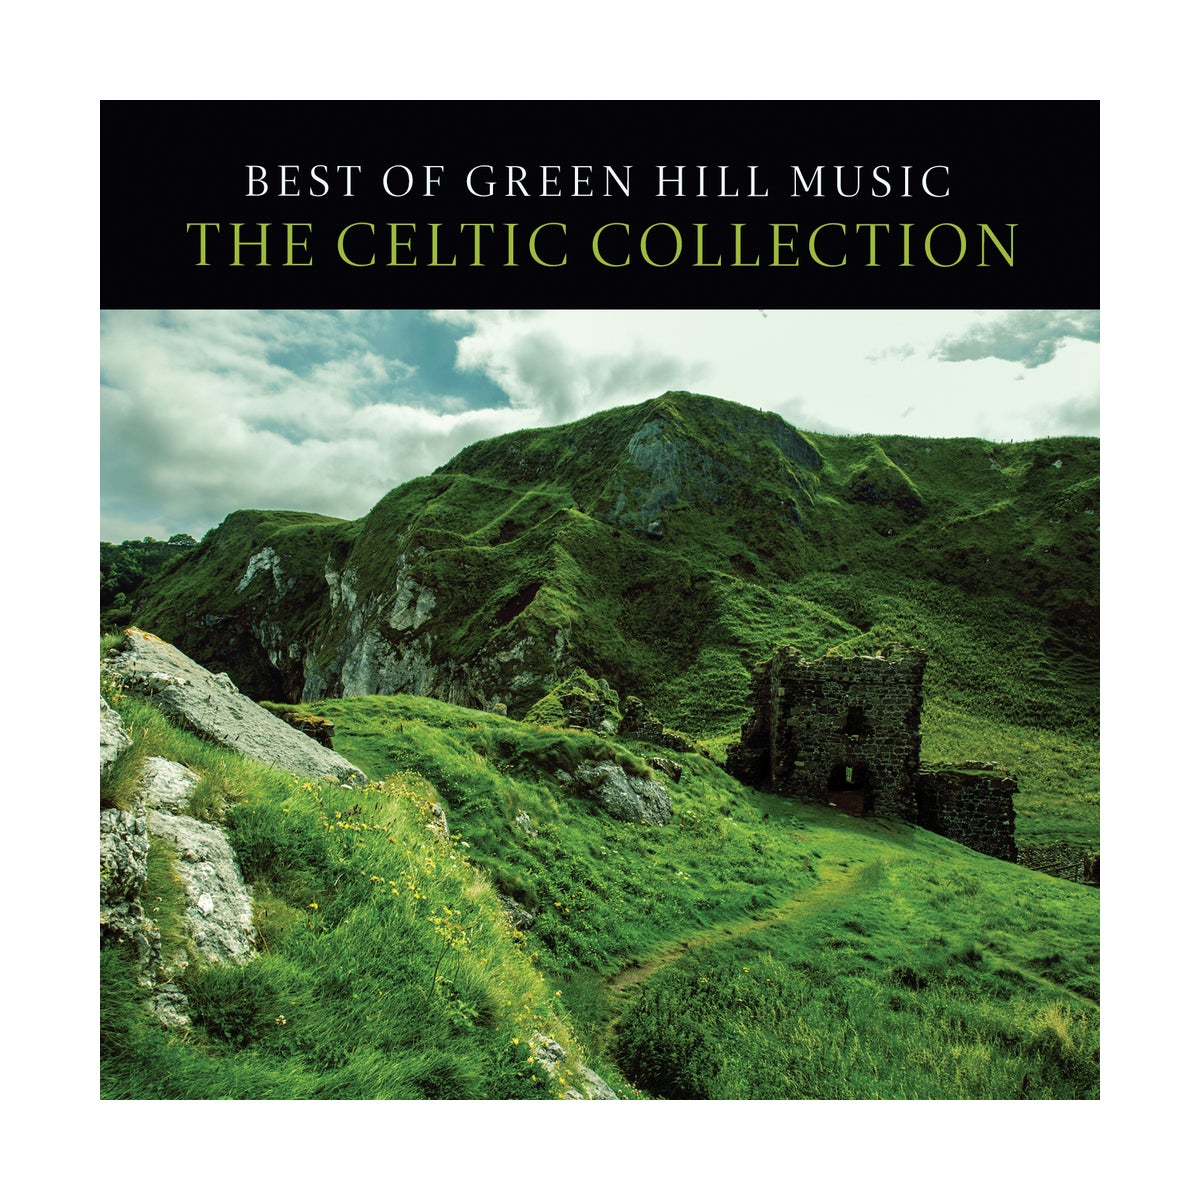 Best of Green Hill: The Celtic Collection